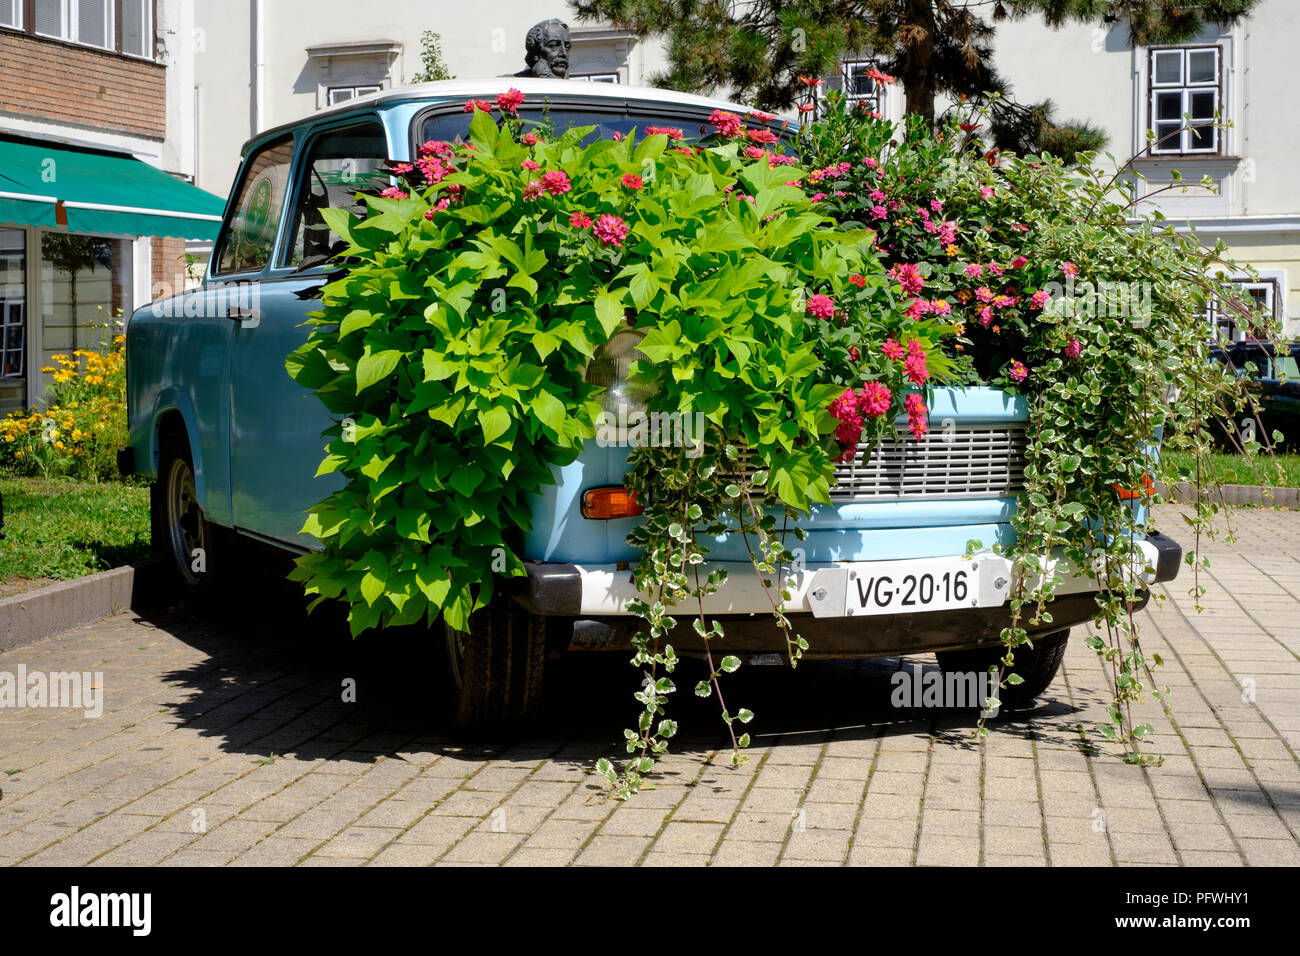 trabant 601 car cosmetically restored and converted into a flowerbed for public display zalaegerszeg zala county hungary Stock Photo